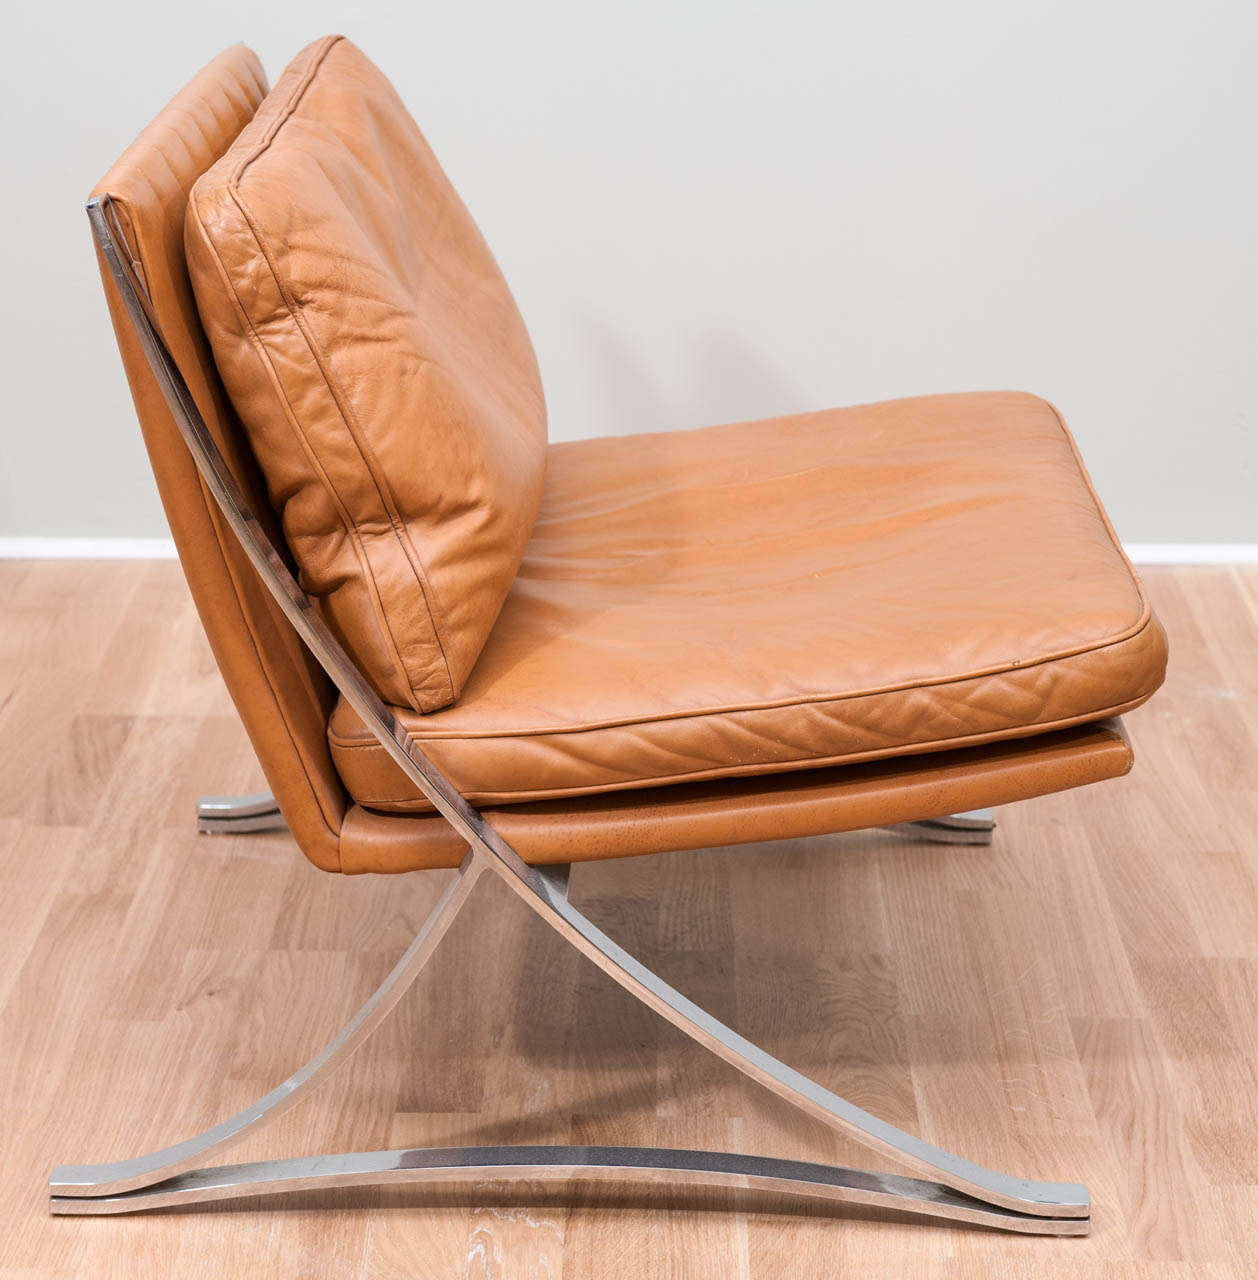 Canadian Pair of Vintage Leather Chairs In the Style of Mies van der Rohe